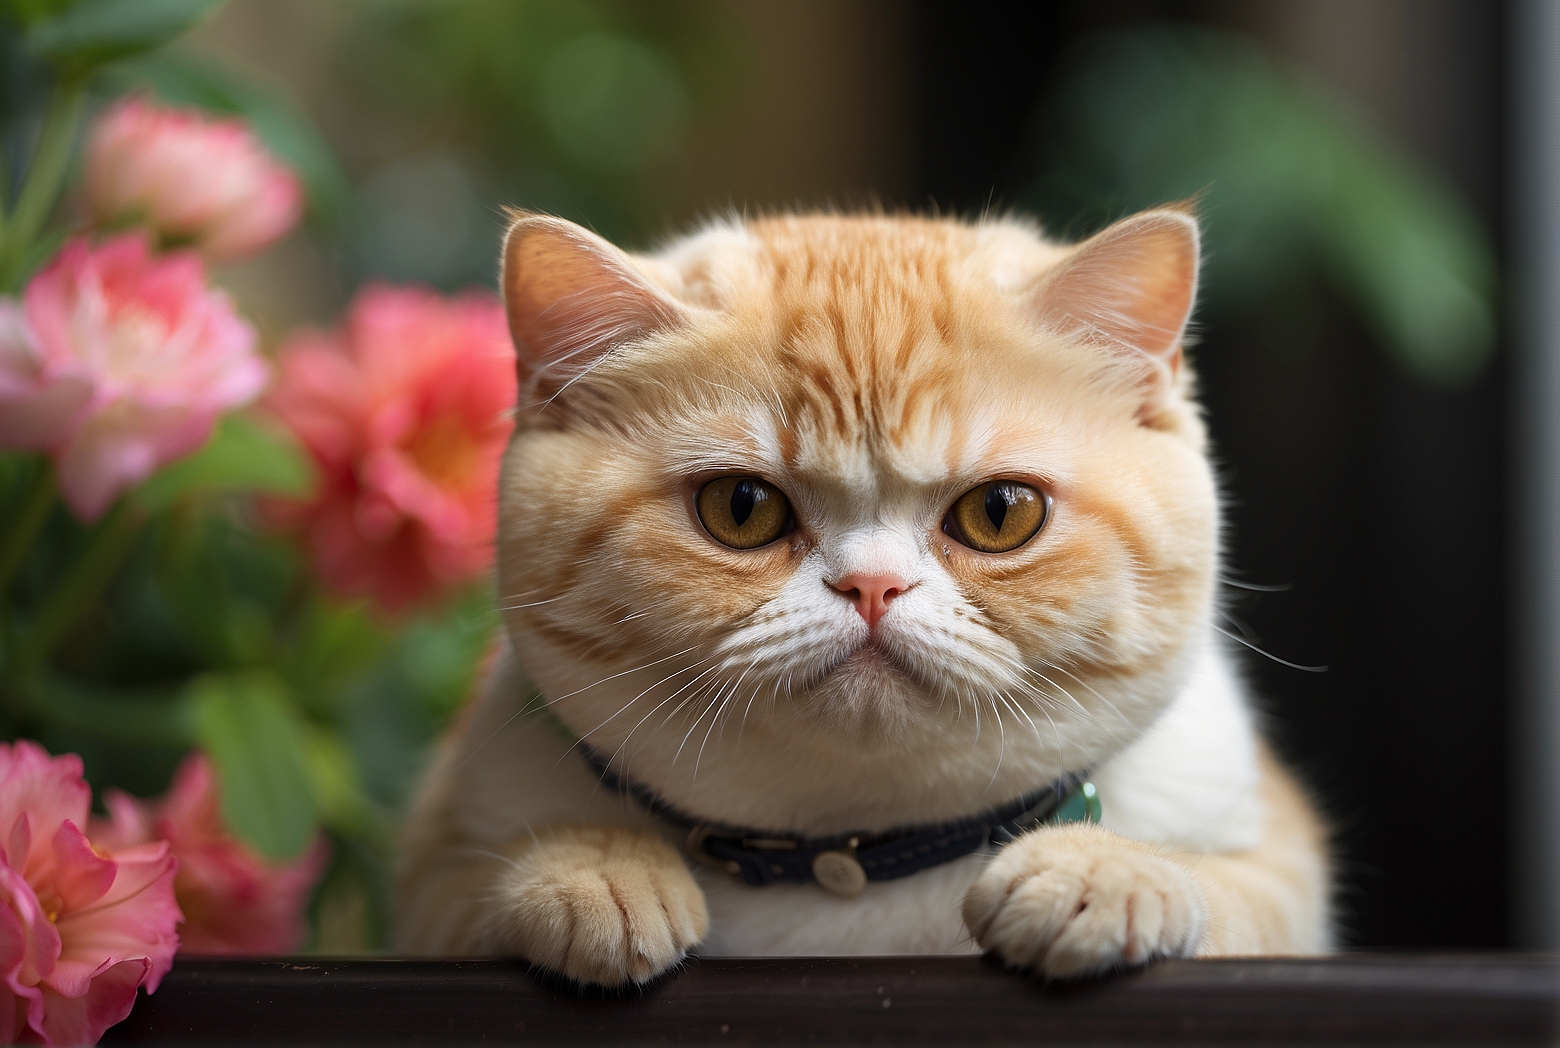 Can Exotic Shorthair Cats Recognize Scents?